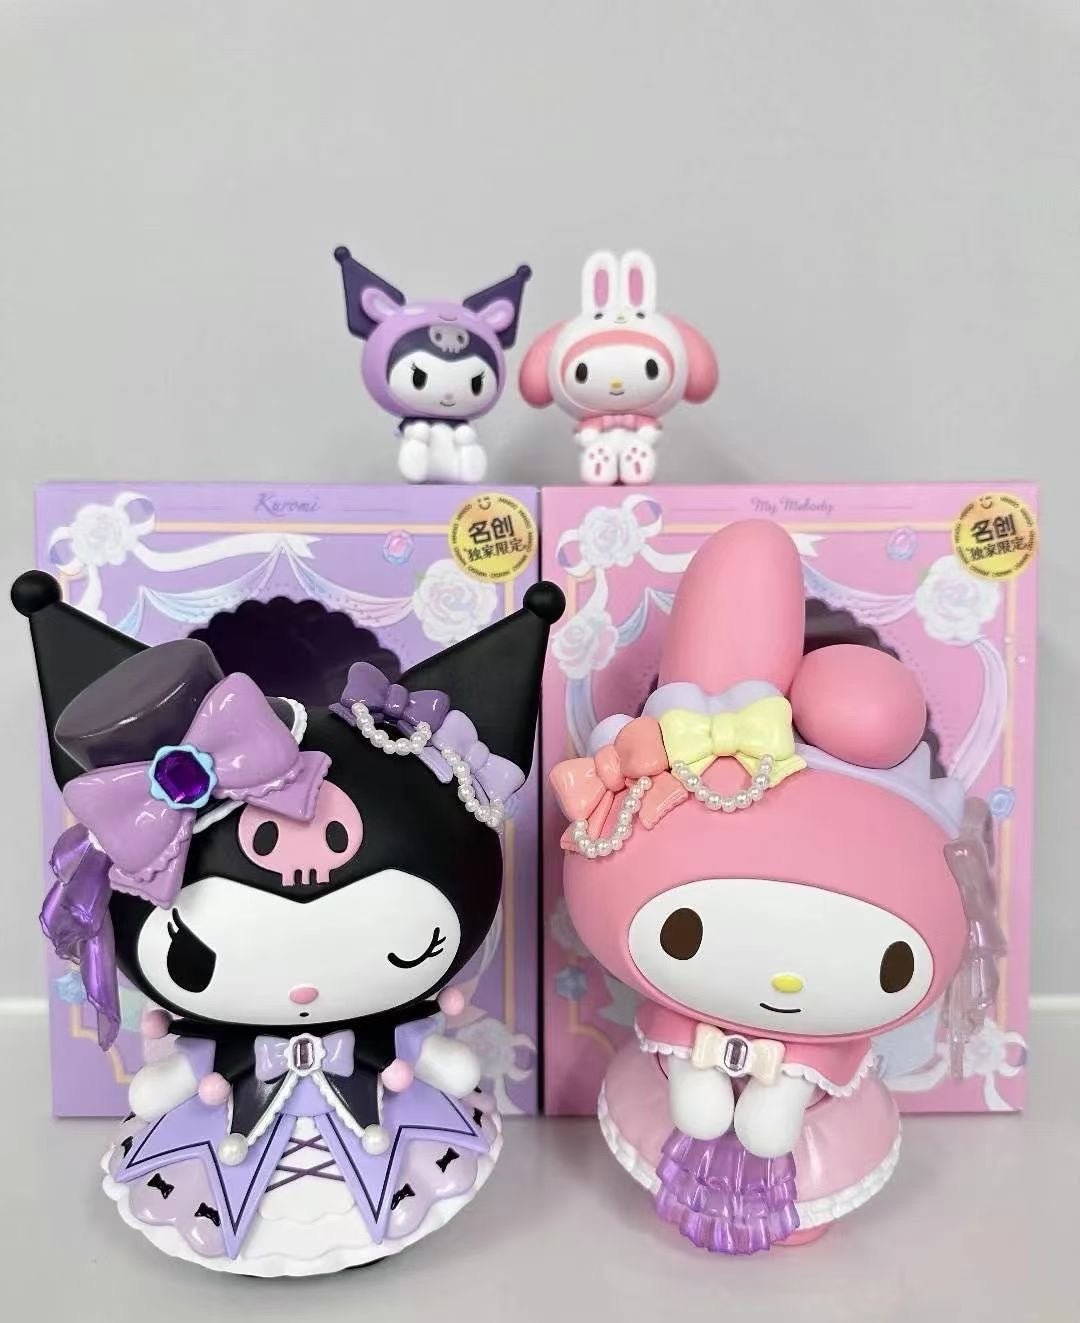 Sanrio x Miniso My Melody Kuromi Rose Party Large Figurines